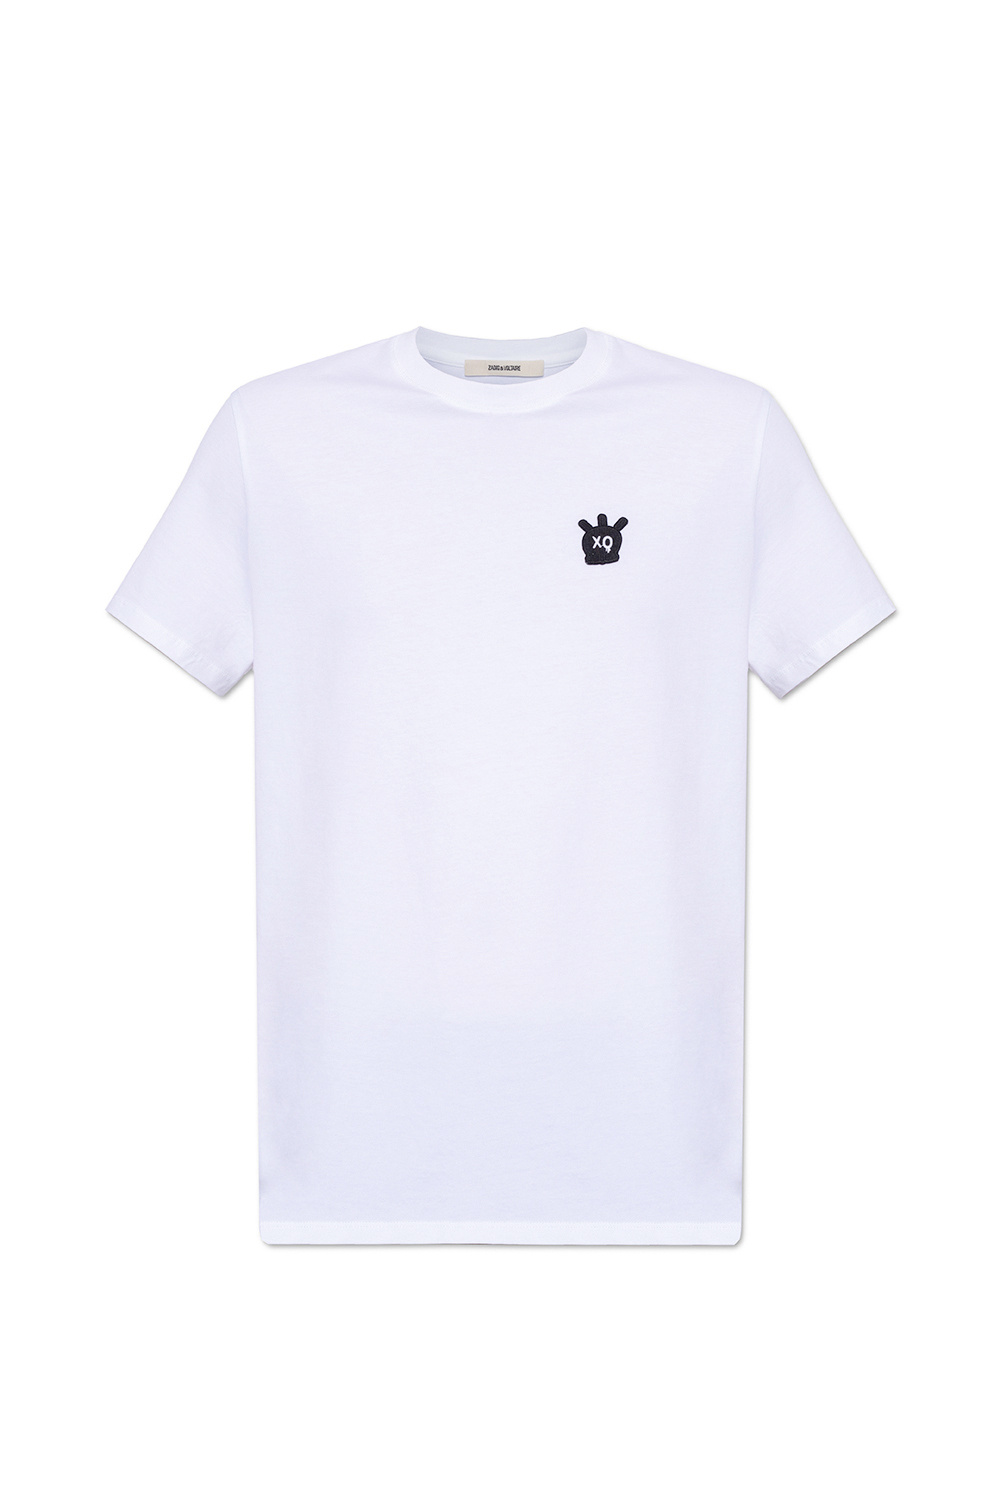 Zadig & Voltaire ‘Tommy Hc’ T-shirt